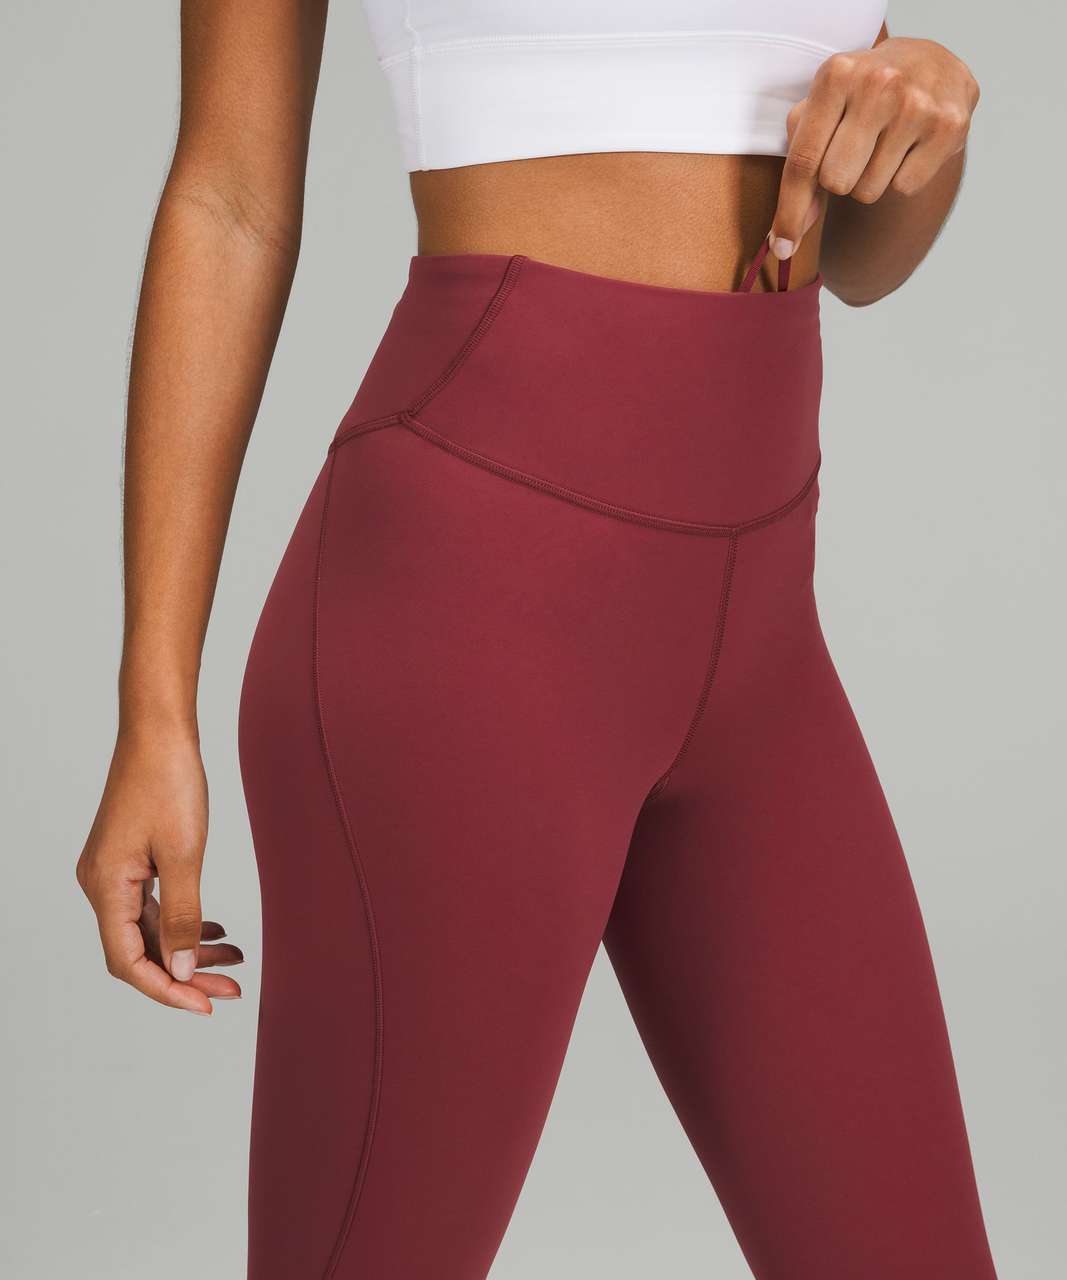 Lululemon Base Pace High-Rise Tight 28" *Brushed Nulux - Mulled Wine